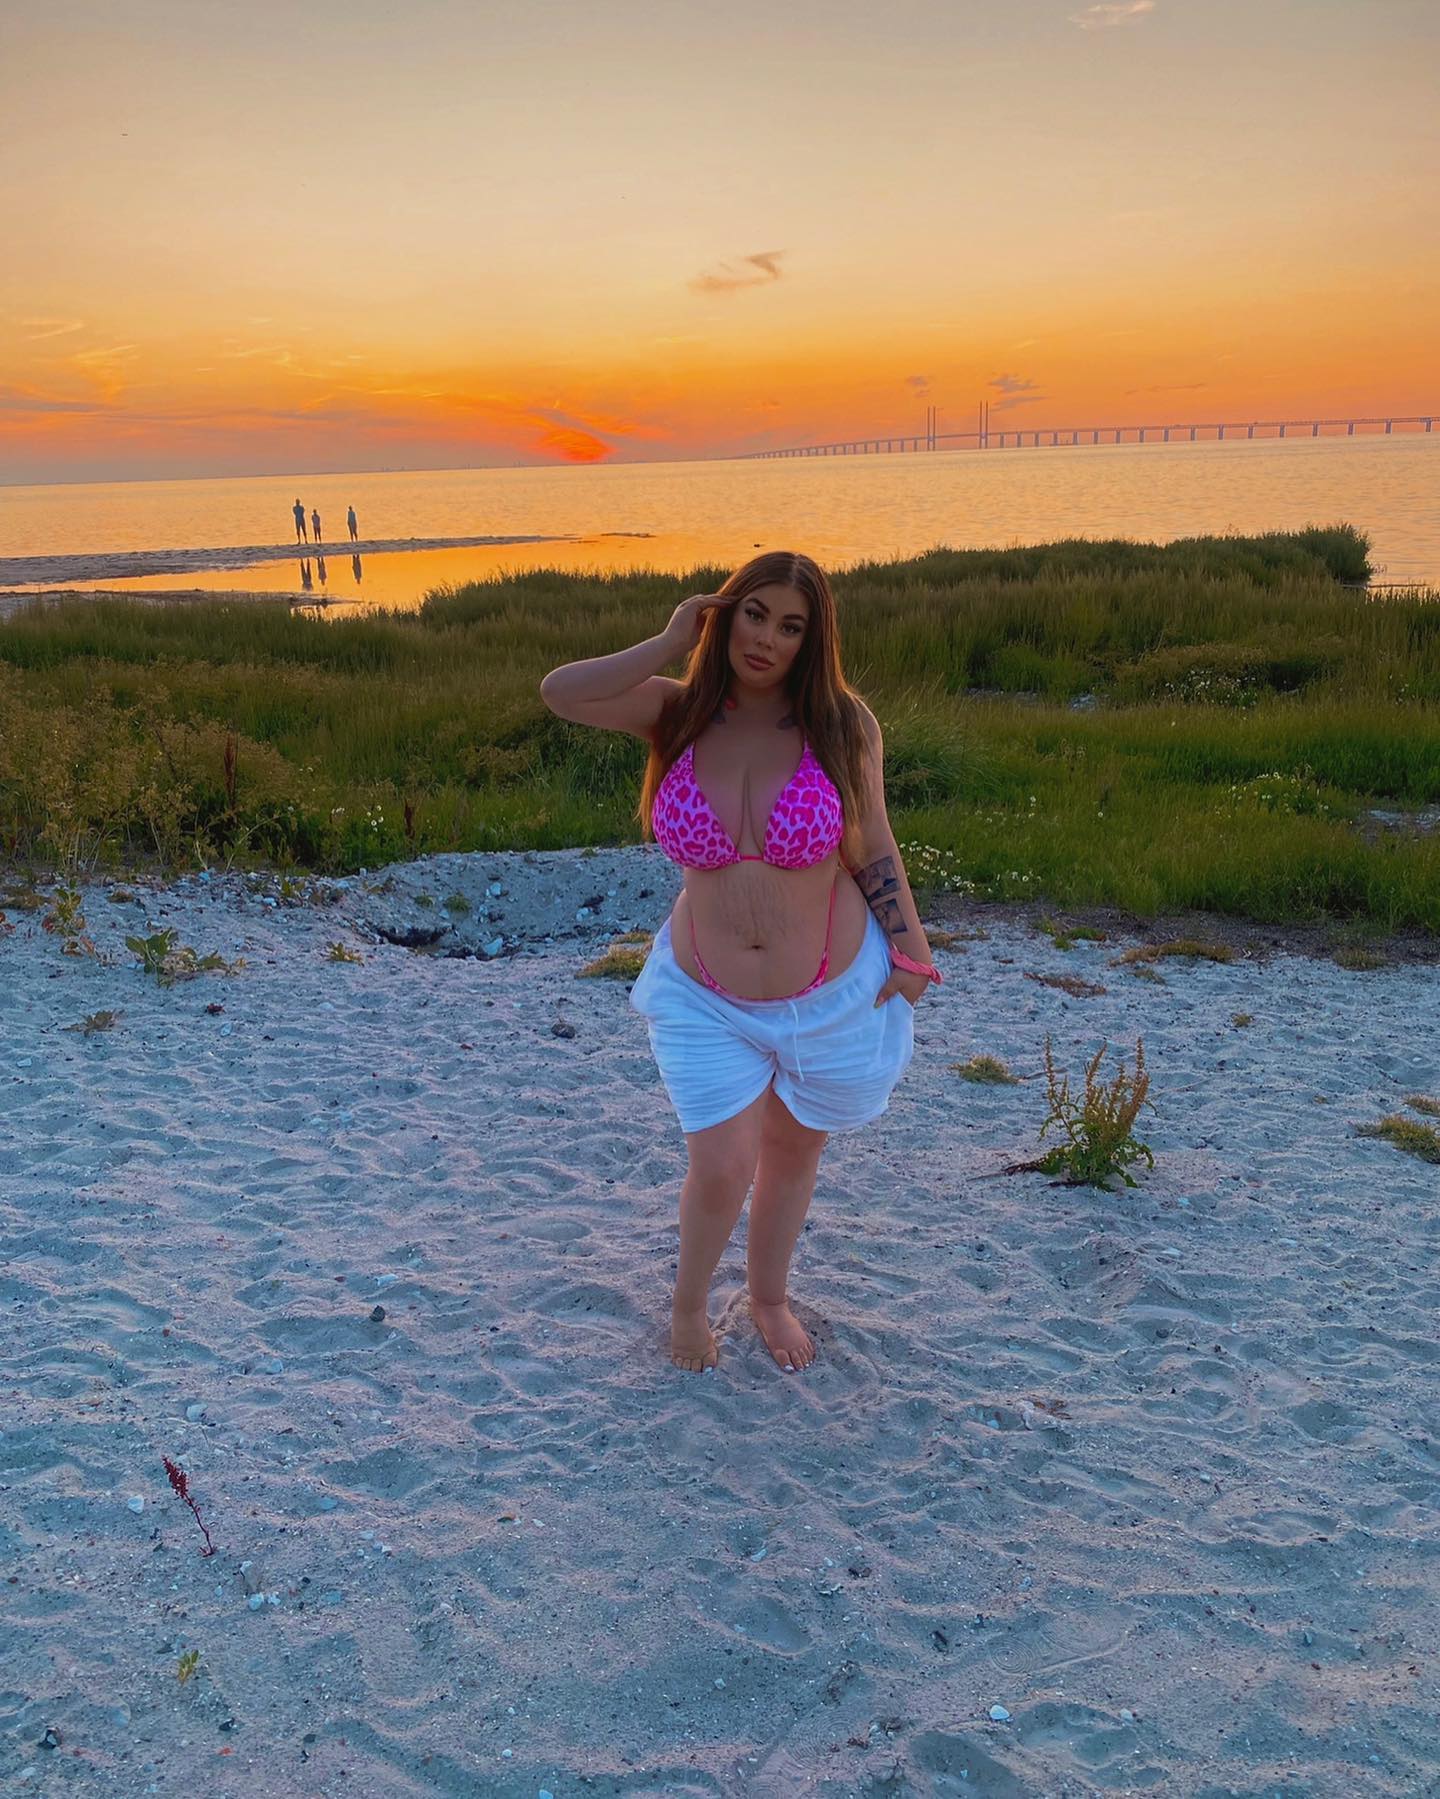 Catching Sunsets not feelings!! 🤭💕